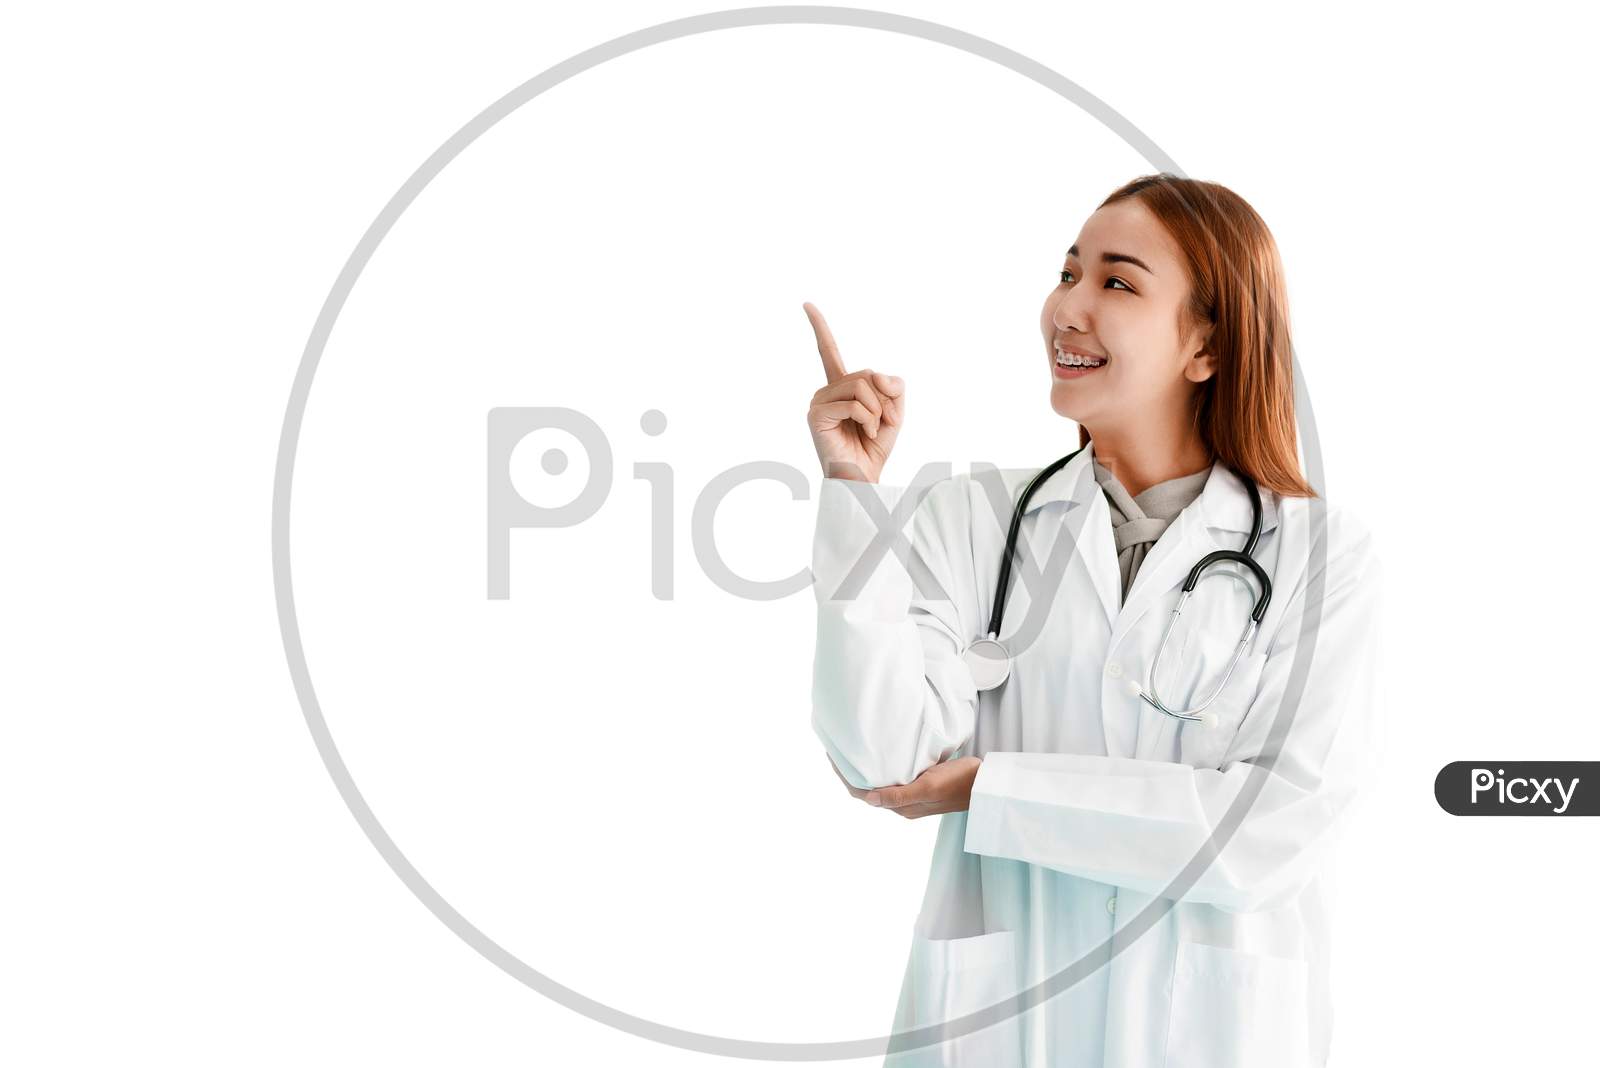 Women Doctor Pointed Her Finger And Looking At Beside And With Stethoscope On White Isolated Background. Medical And Healthcare Concept. People And Technology Theme.